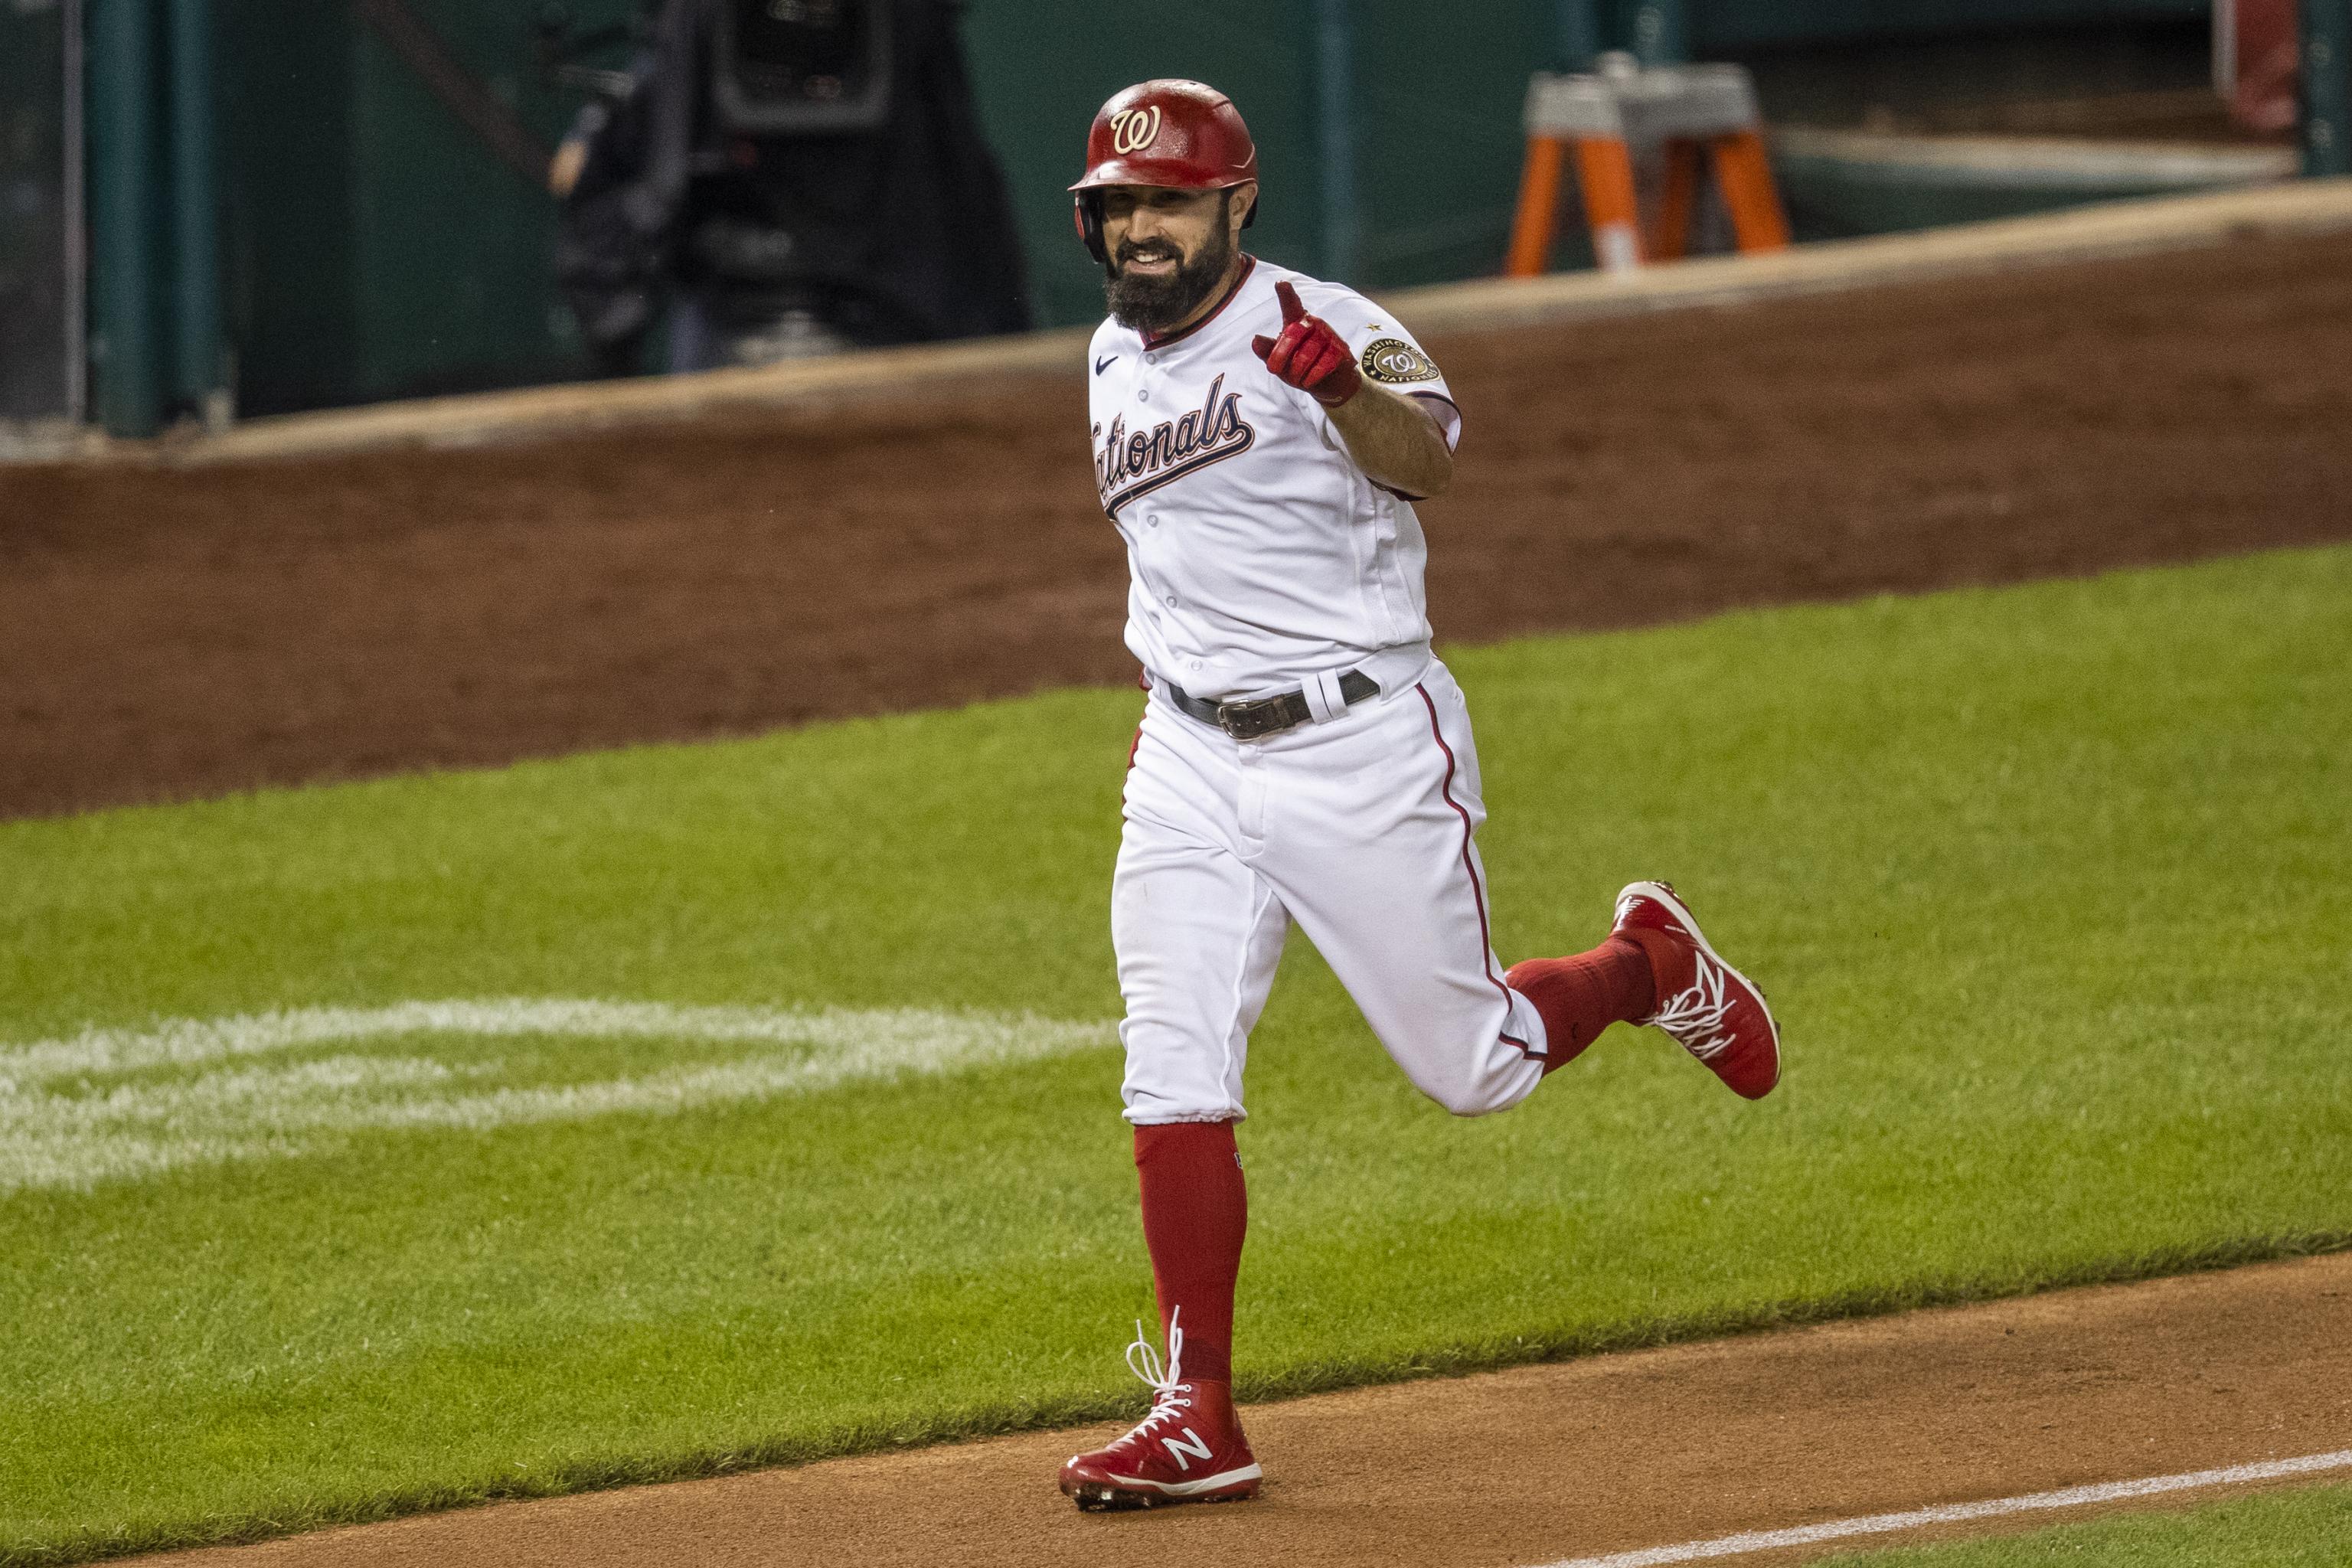 Adam Eaton confirms his playing career is over after 10 seasons in big  leagues: 'I wish I could play; my body's just not what it needs to be